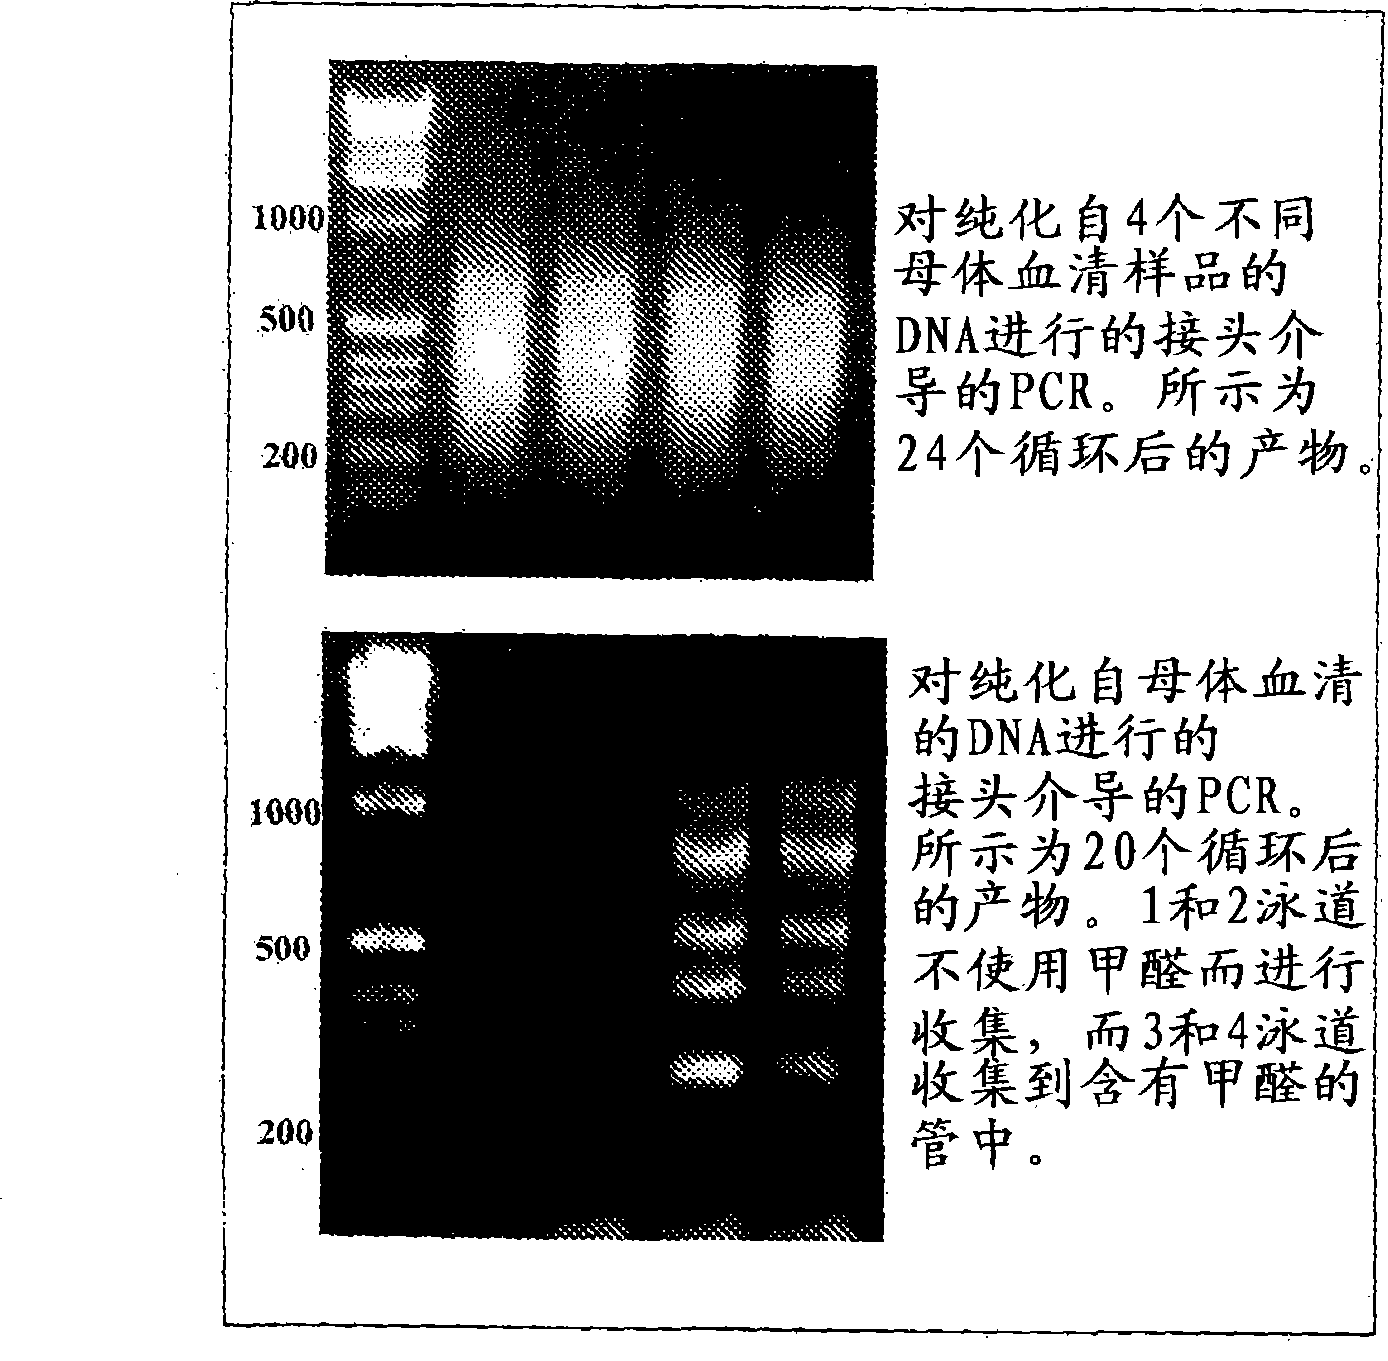 Specific amplification of fetal DNA sequences from a mixed, fetal-maternal source